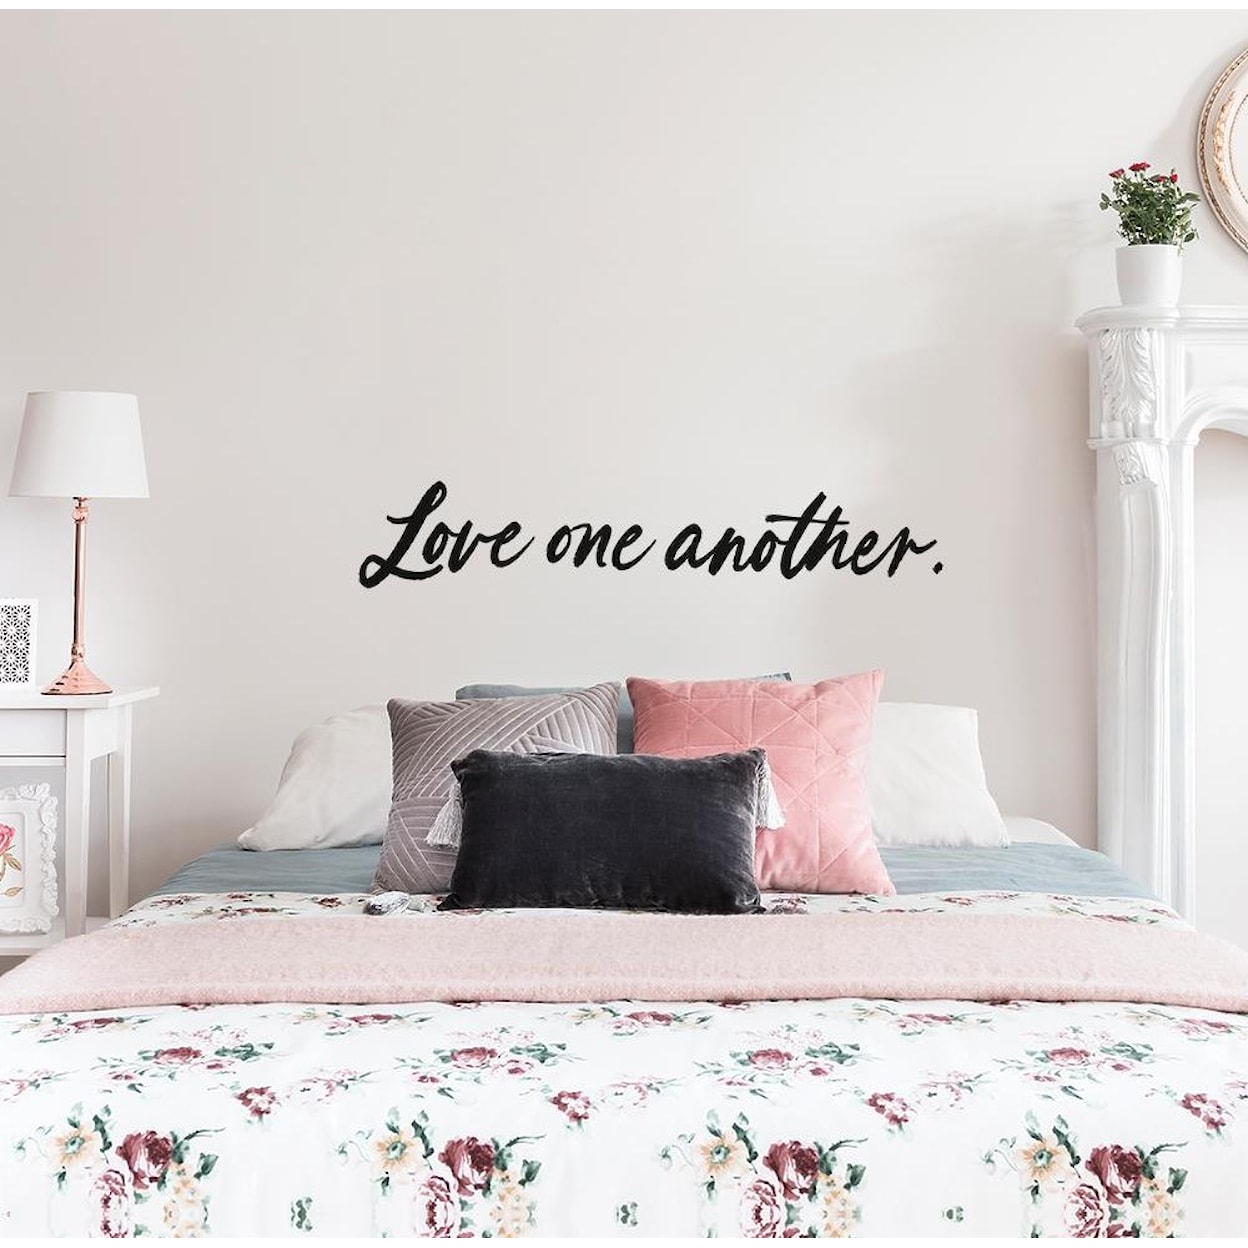 Tempaper Wall Decals Love One Another Wall Decal